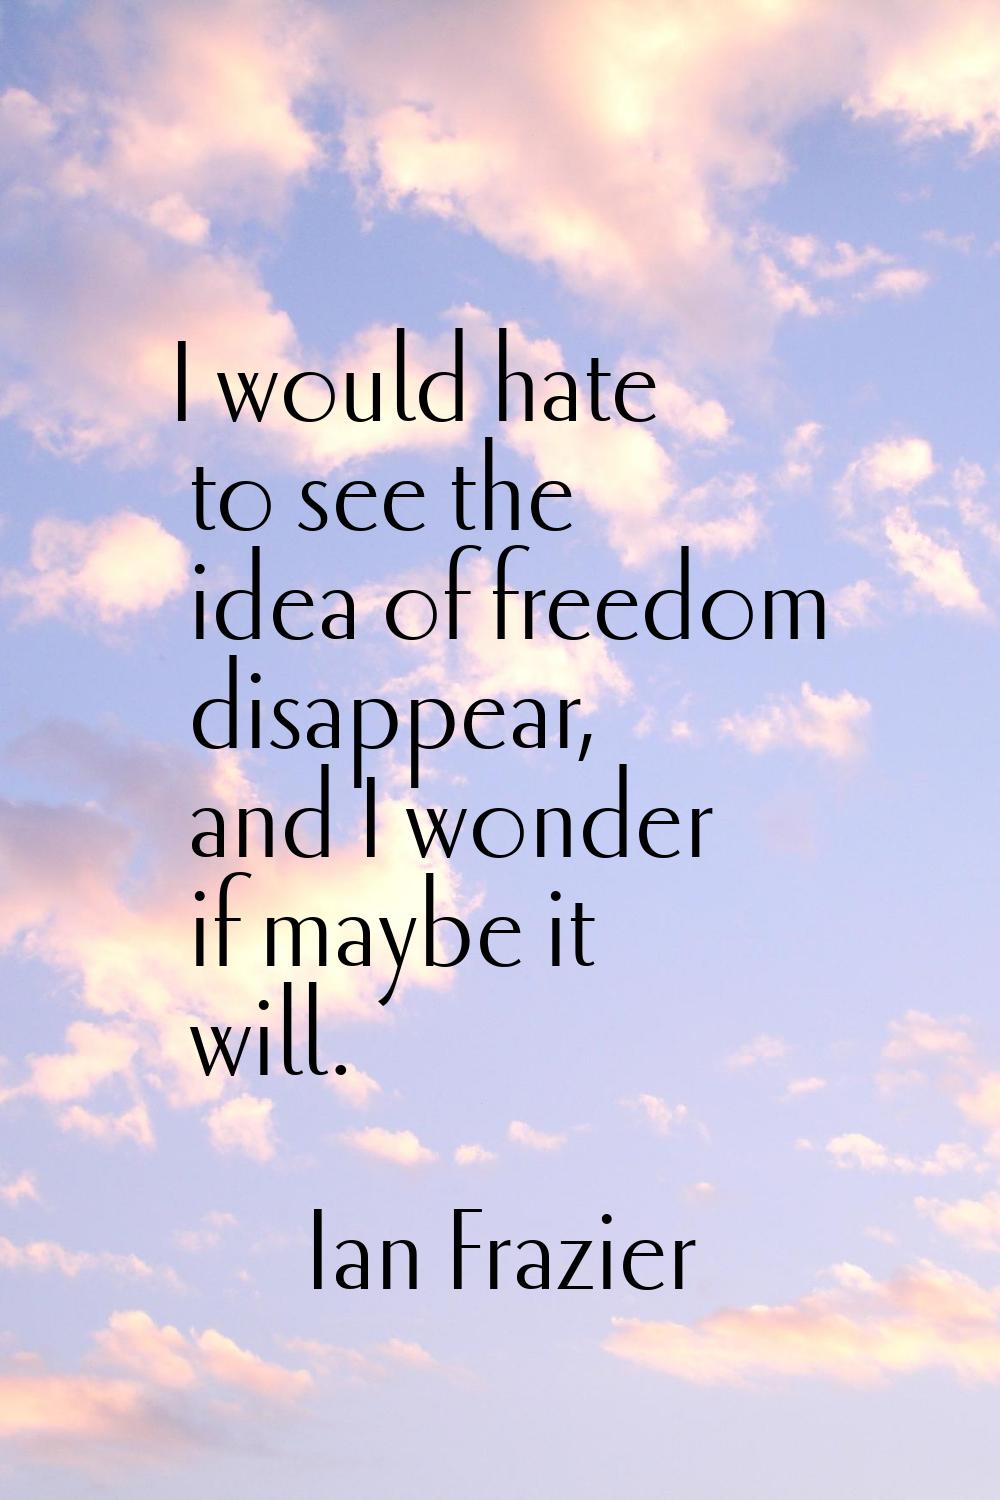 I would hate to see the idea of freedom disappear, and I wonder if maybe it will.